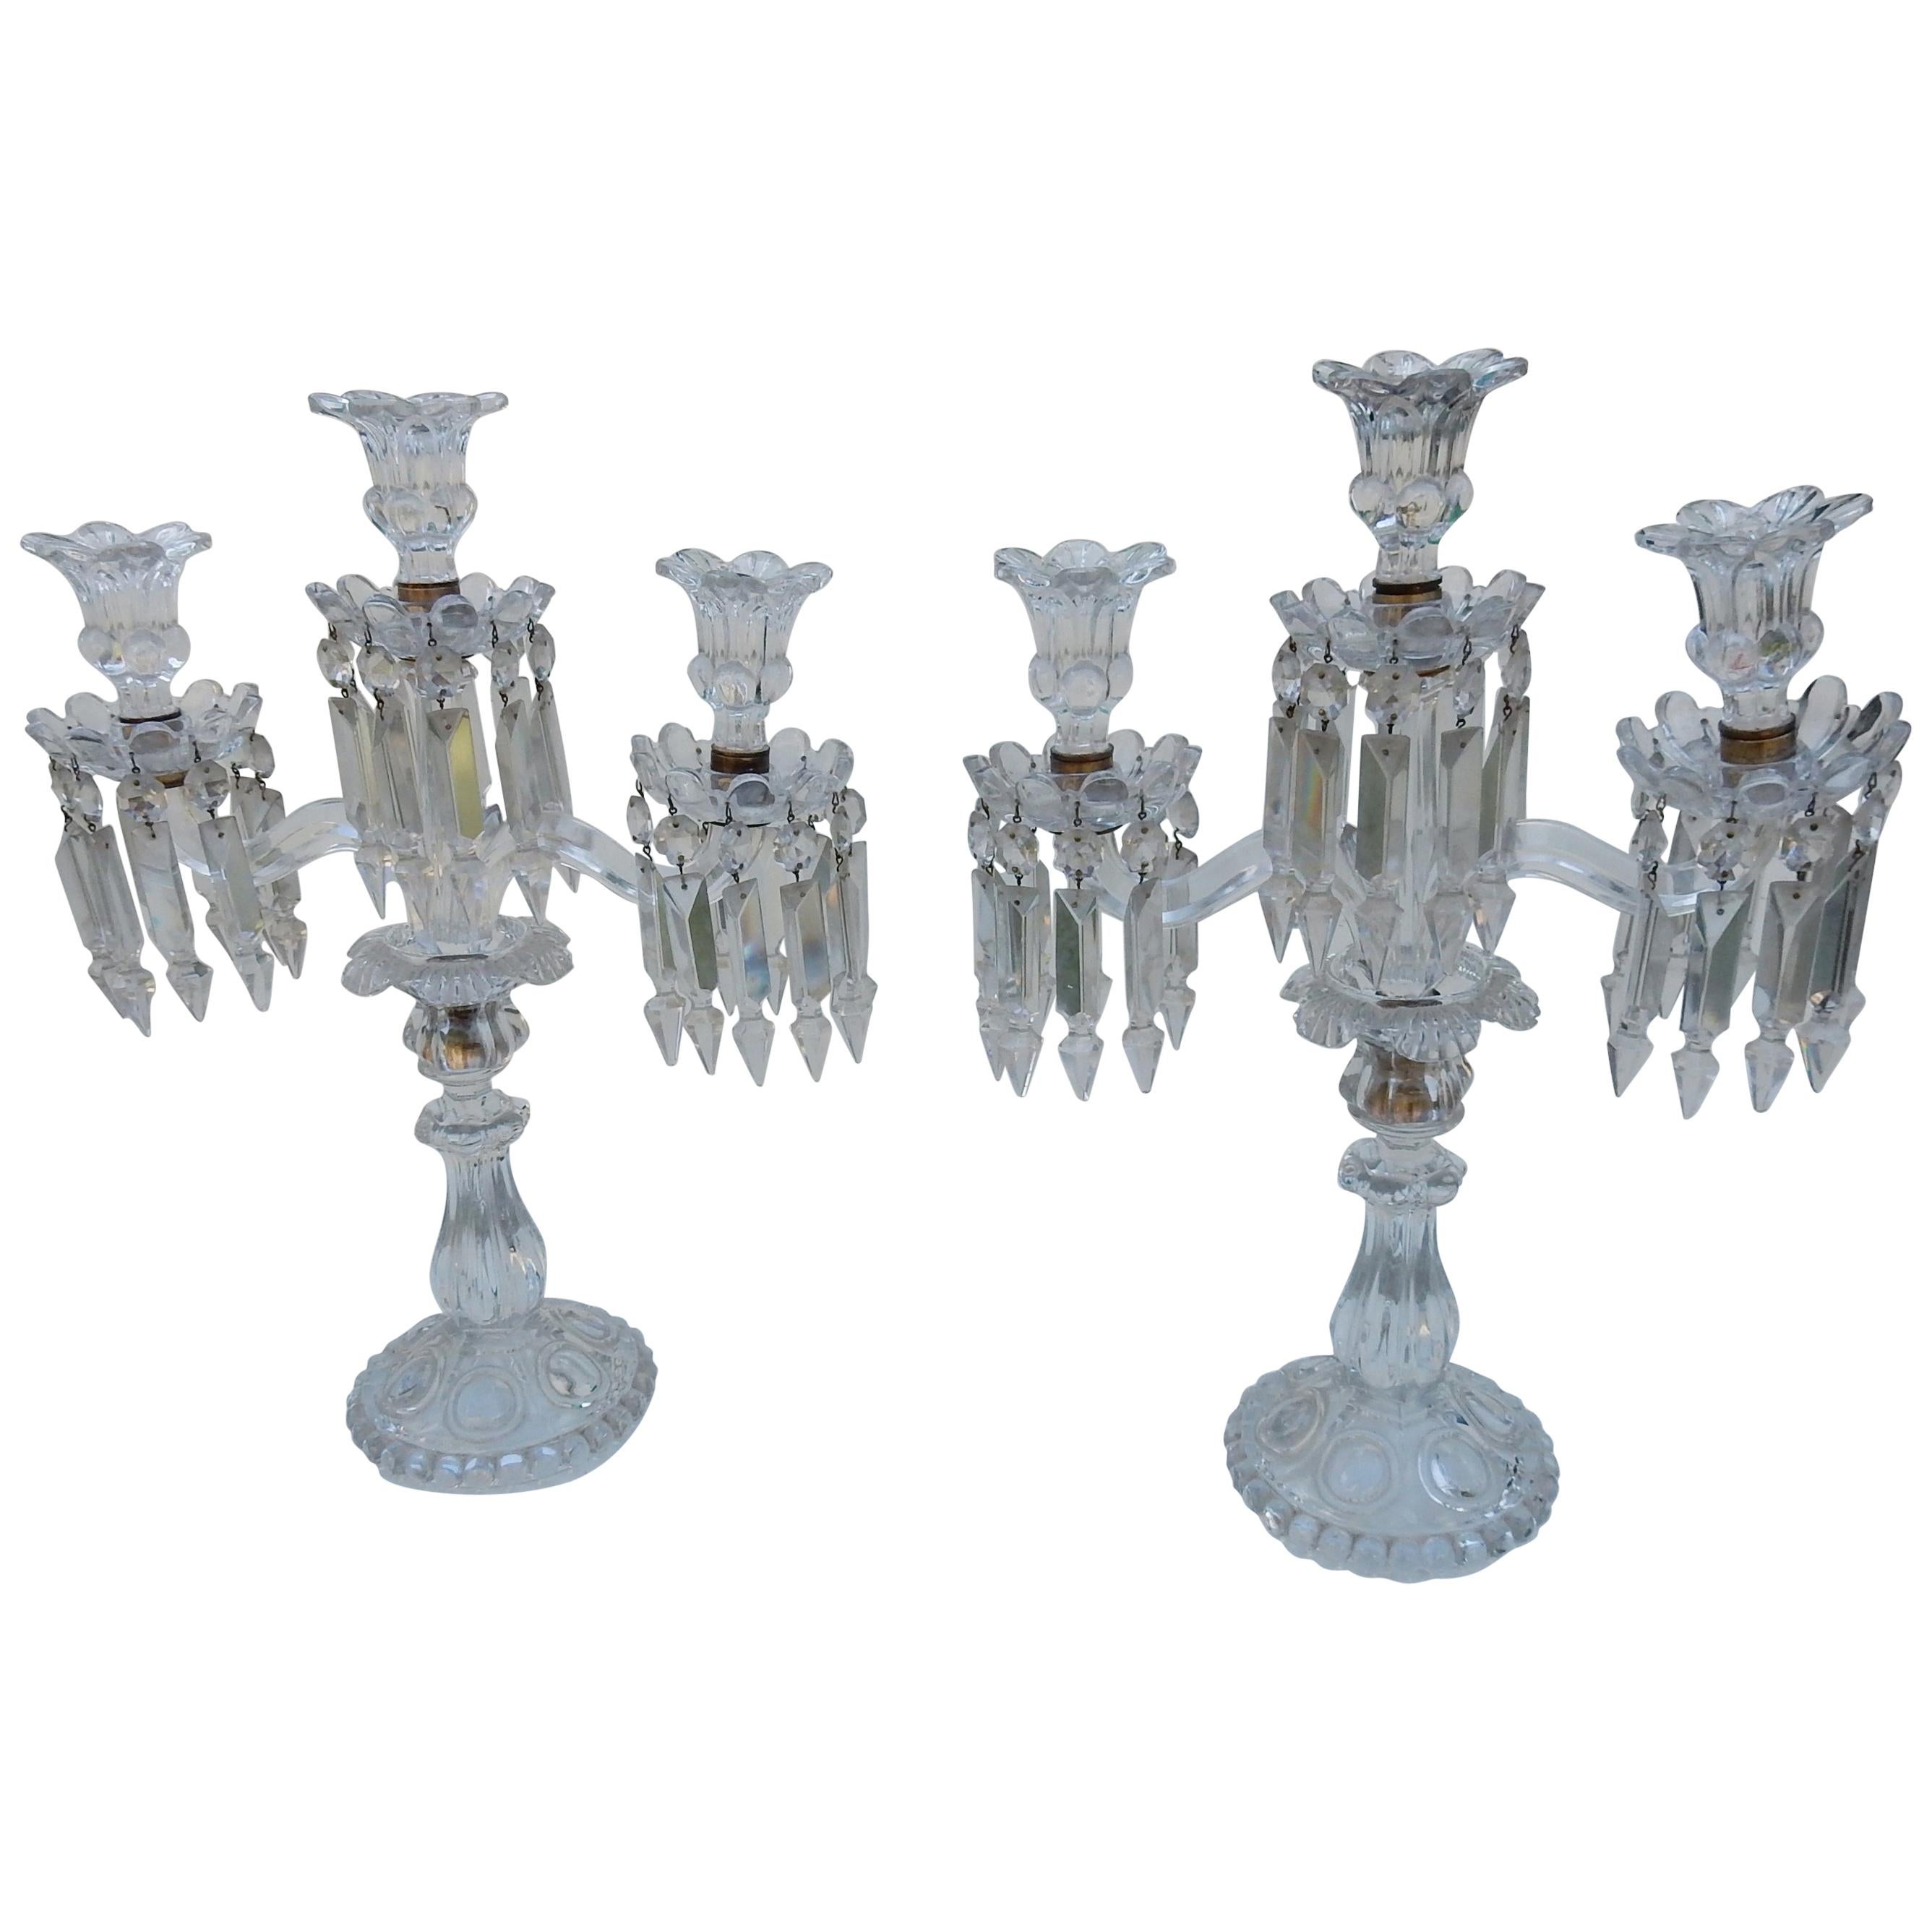 1950 Pair of Baccarat Crystal Chandeliers with 2 Arms and Signed Baccarat